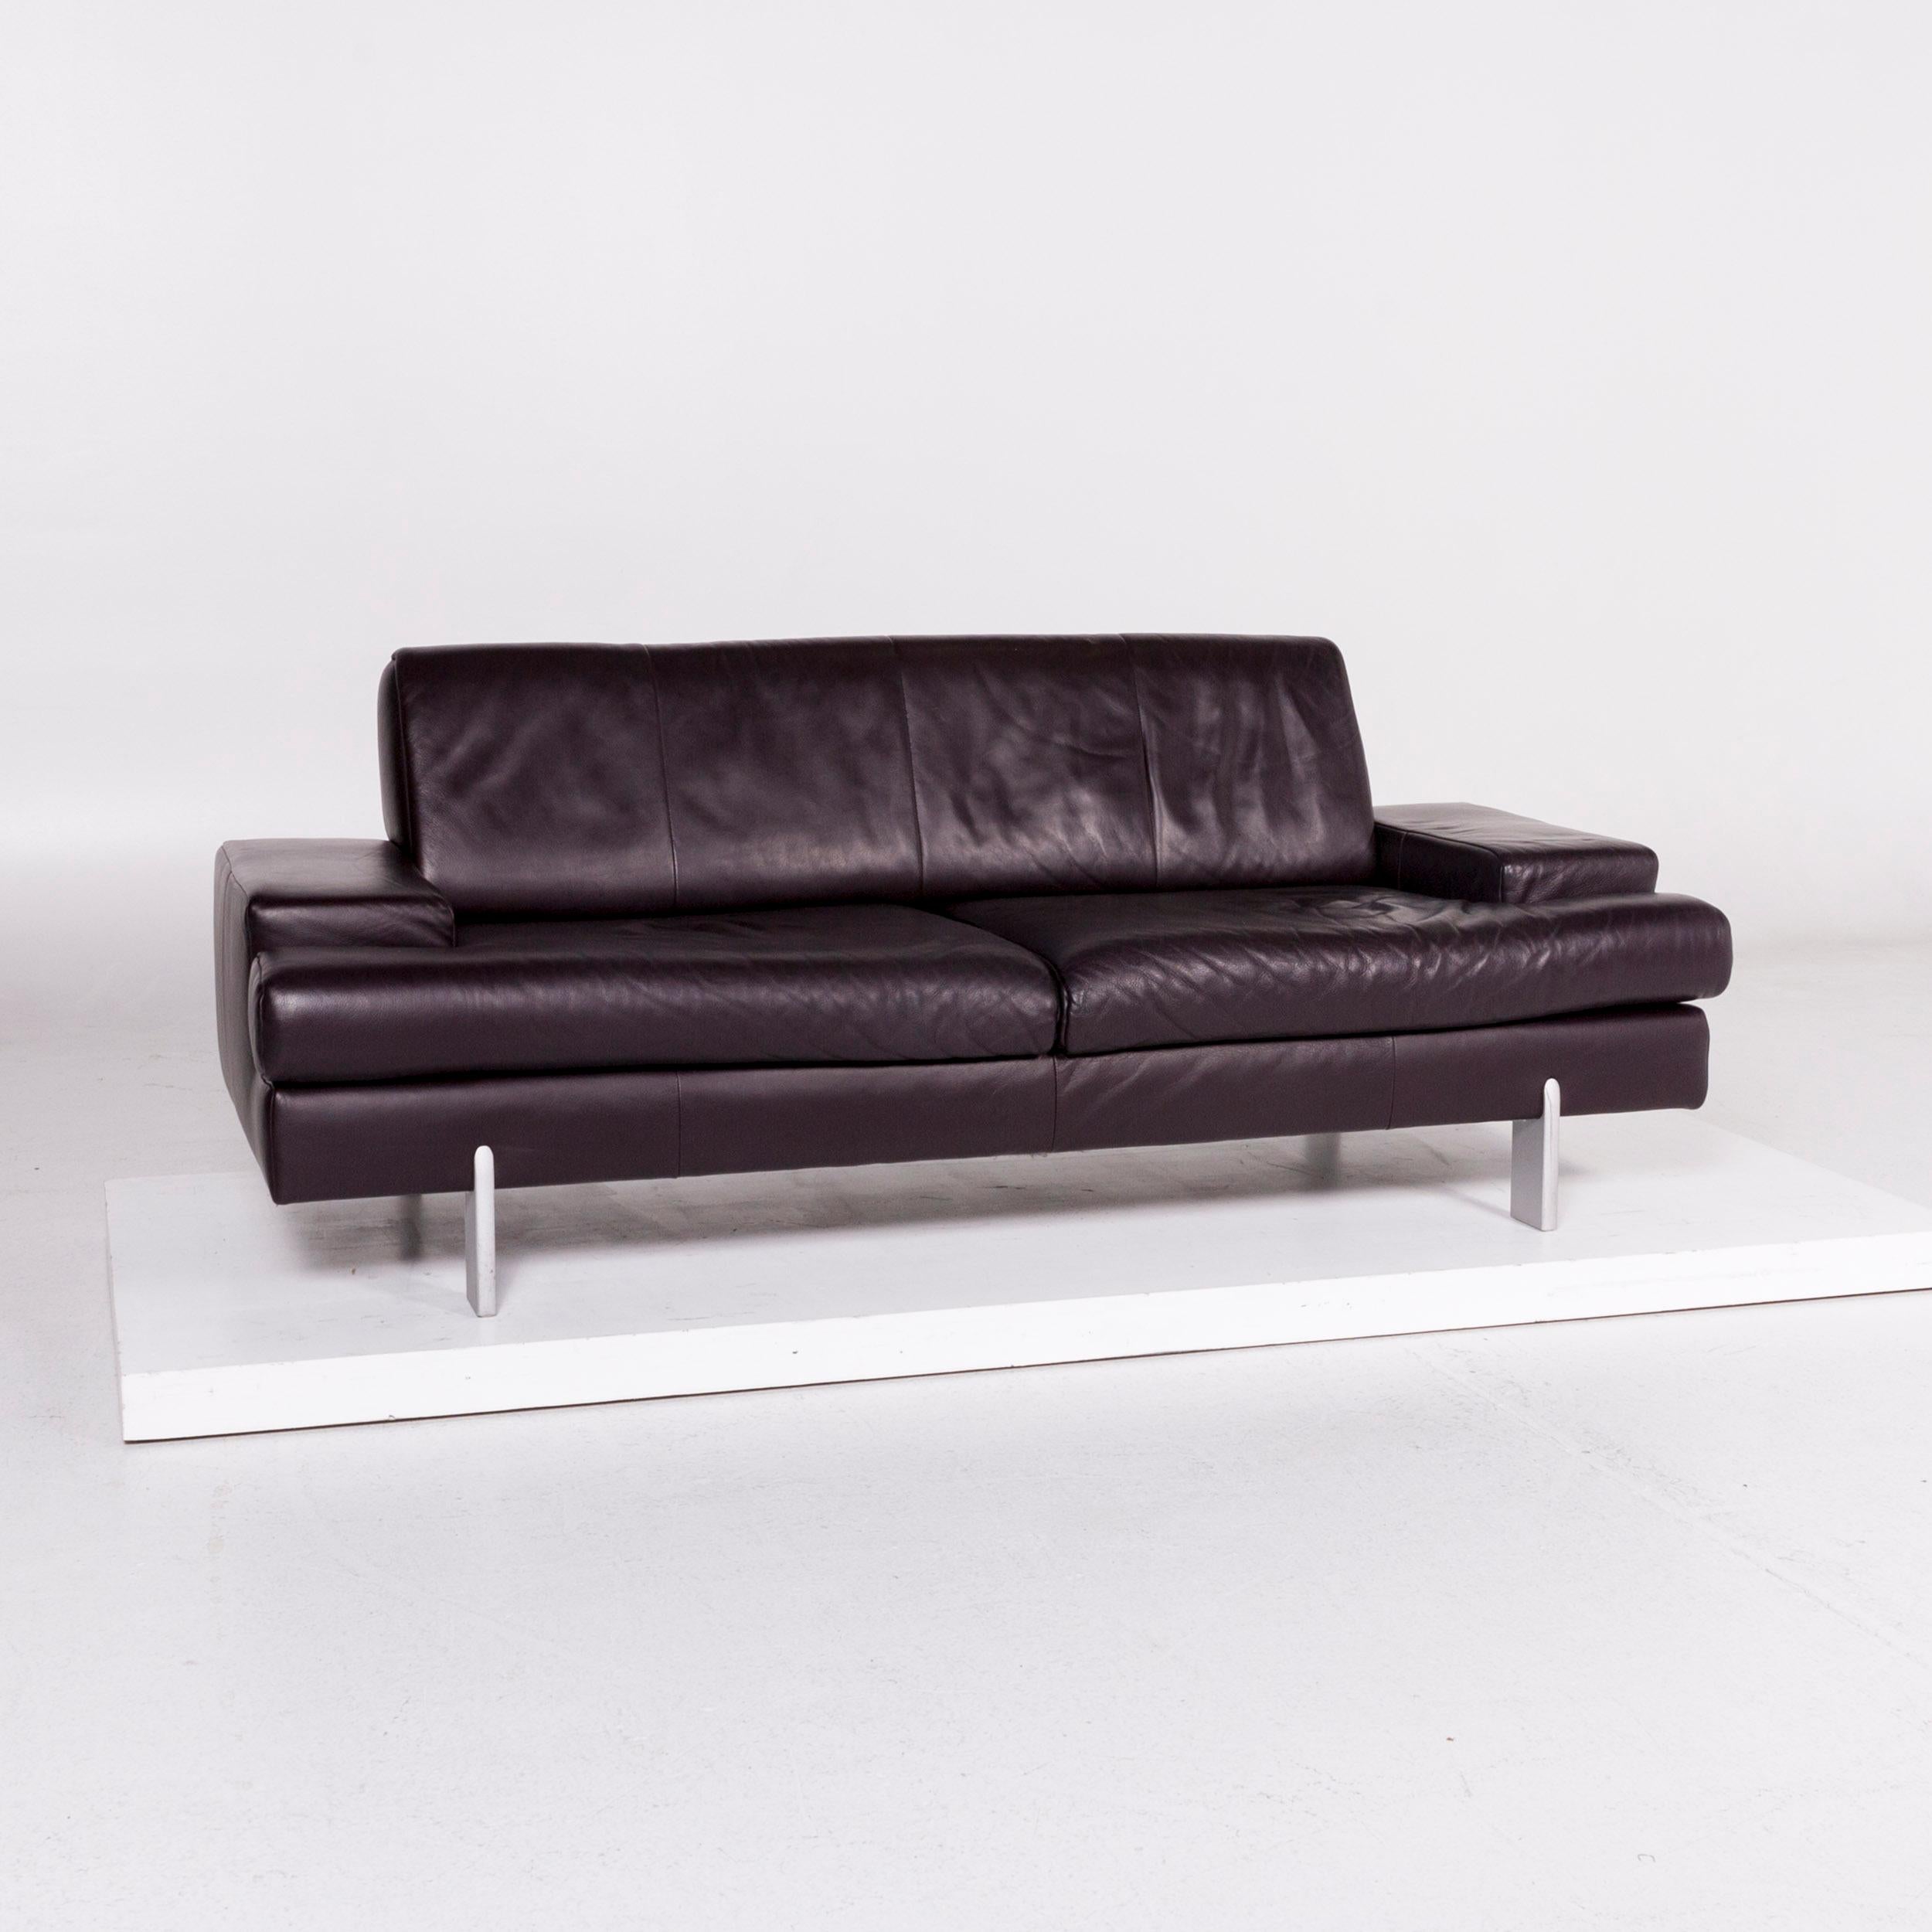 We bring to you a BMP Rolf Benz leather sofa set eggplant 1 three-seat, 1 two-seat, 1.

 
 Product measurements in centimeters:
 
Depth 278
Width 199
Height 79
Seat-height 44
Rest-height 51
Seat-depth 58
Seat-width 148
Back-height 36.